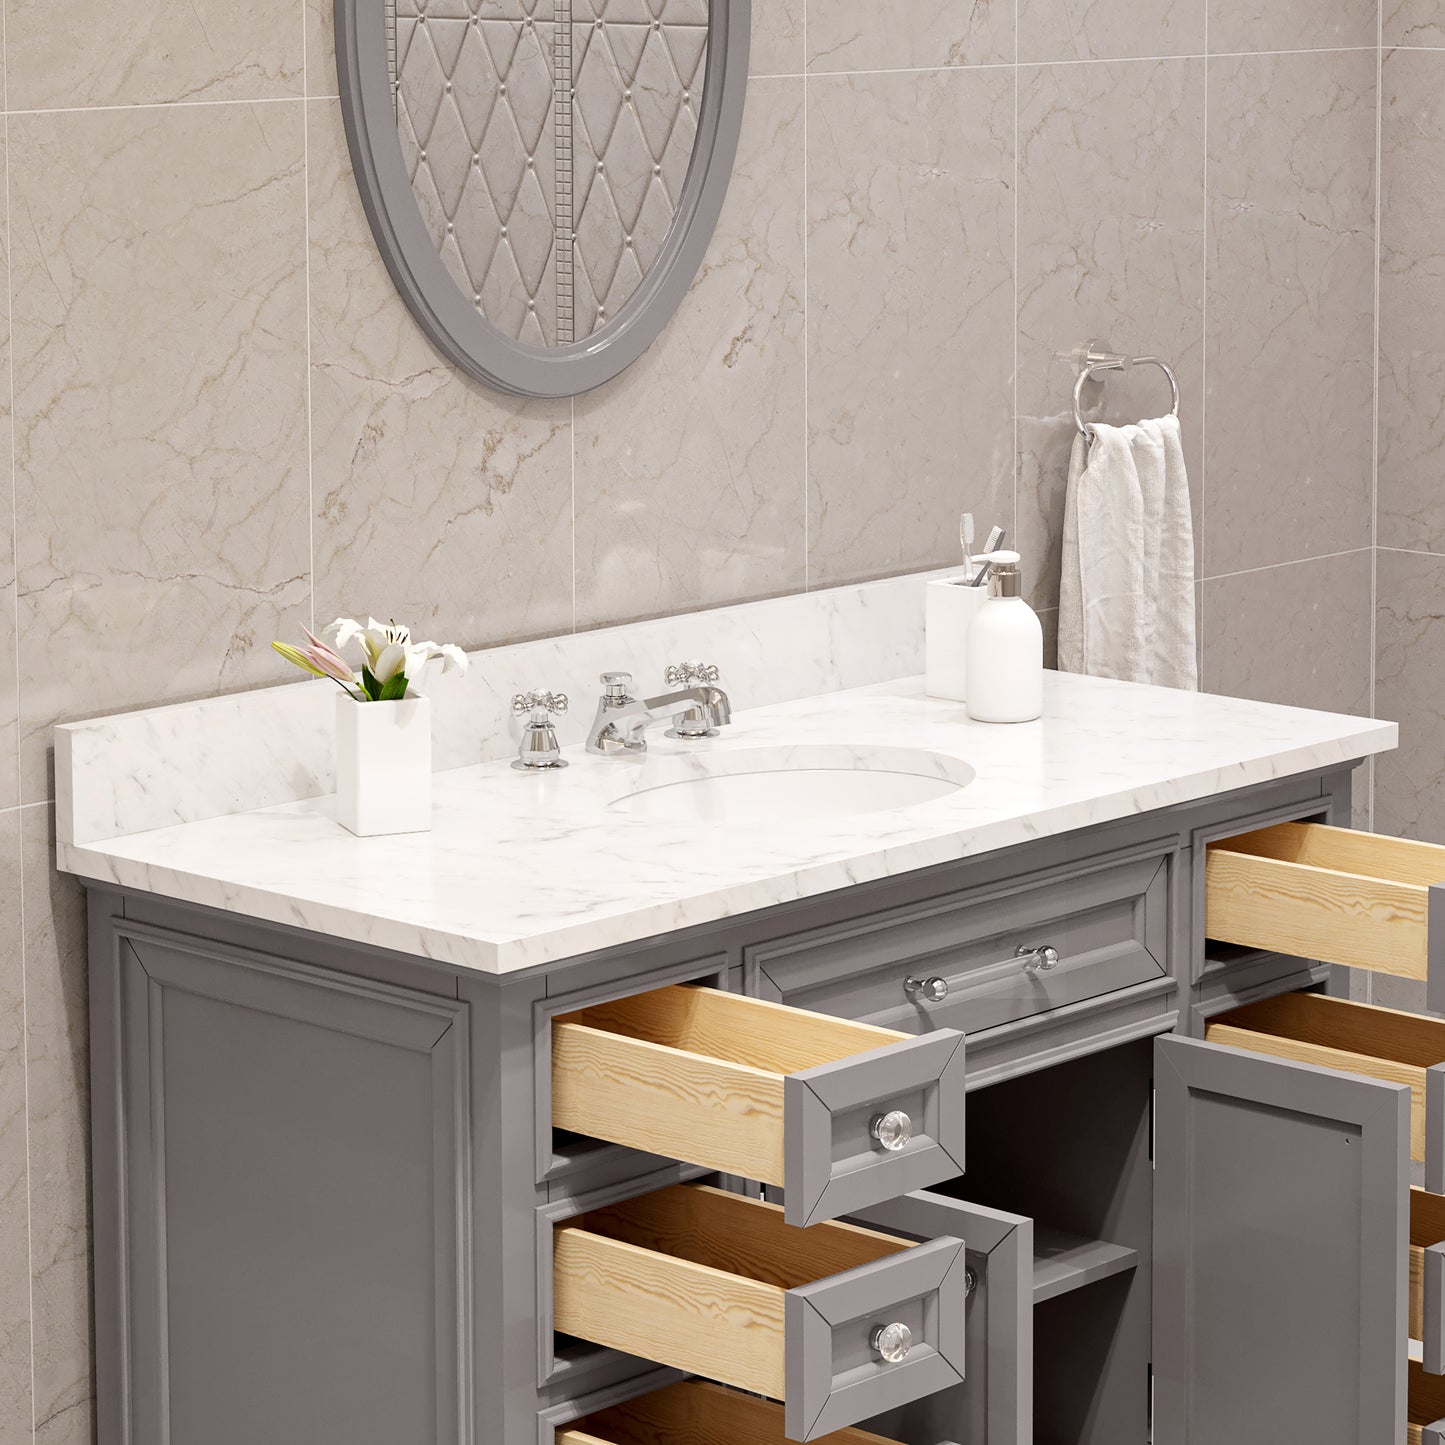 Derby 48 Inch Cashmere Grey Single Sink Bathroom Vanity With Matching Framed Mirror- Water Creation